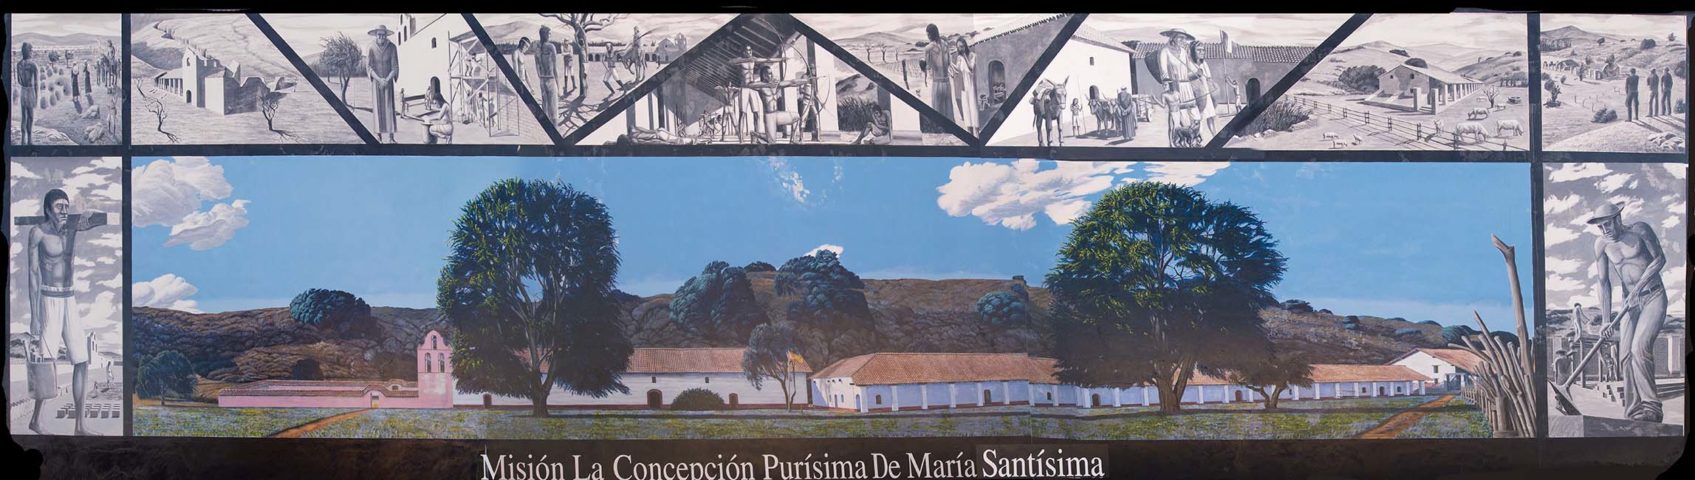 Large Outdoor Mural in Lompoc